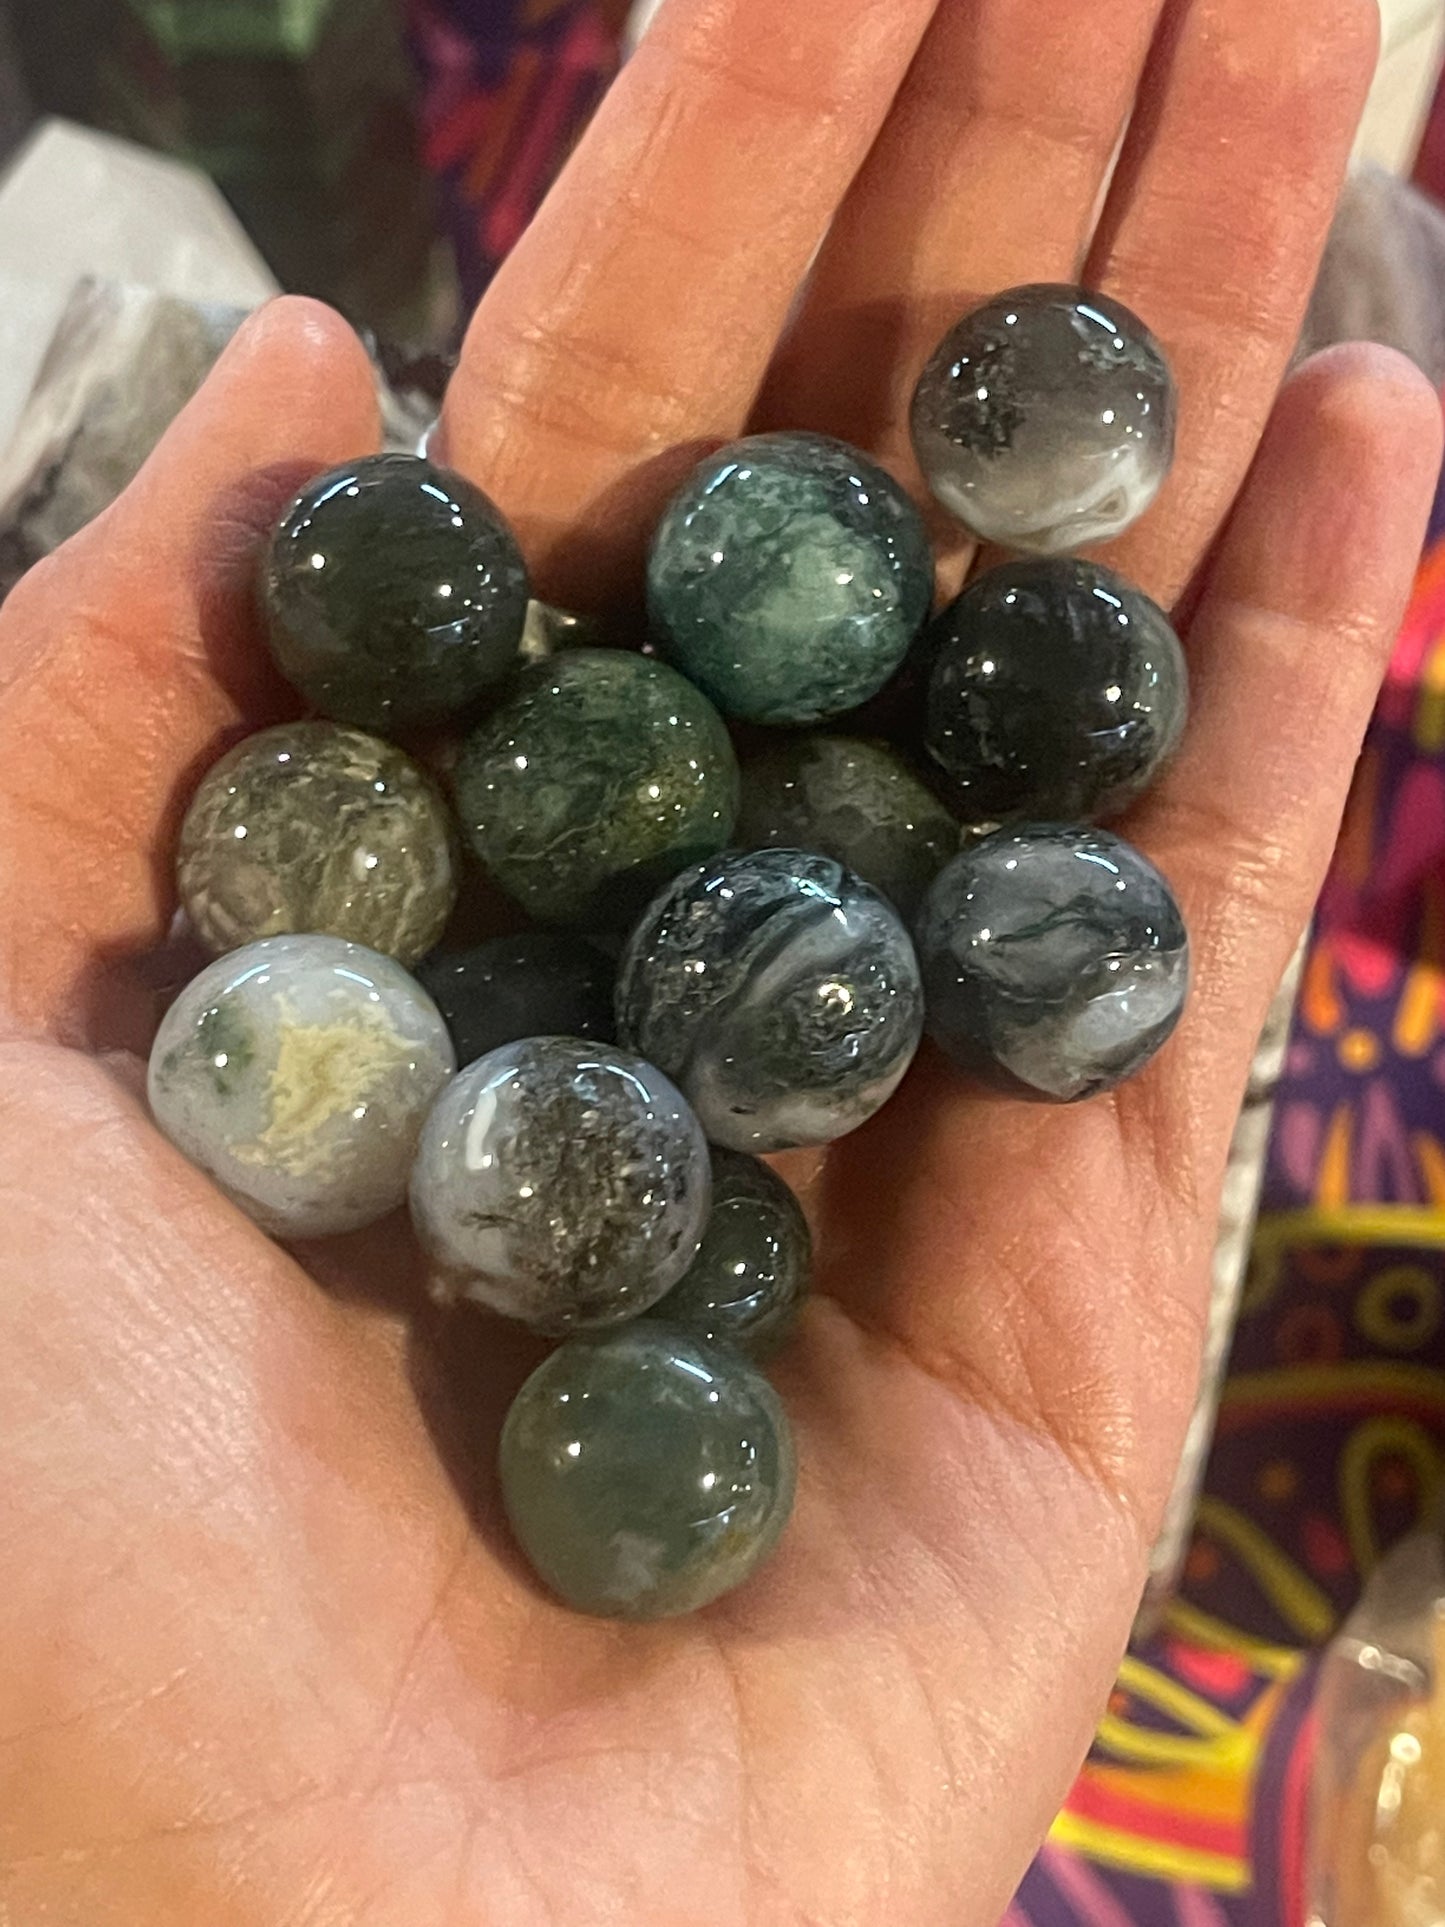 Moss Agate Small Spheres